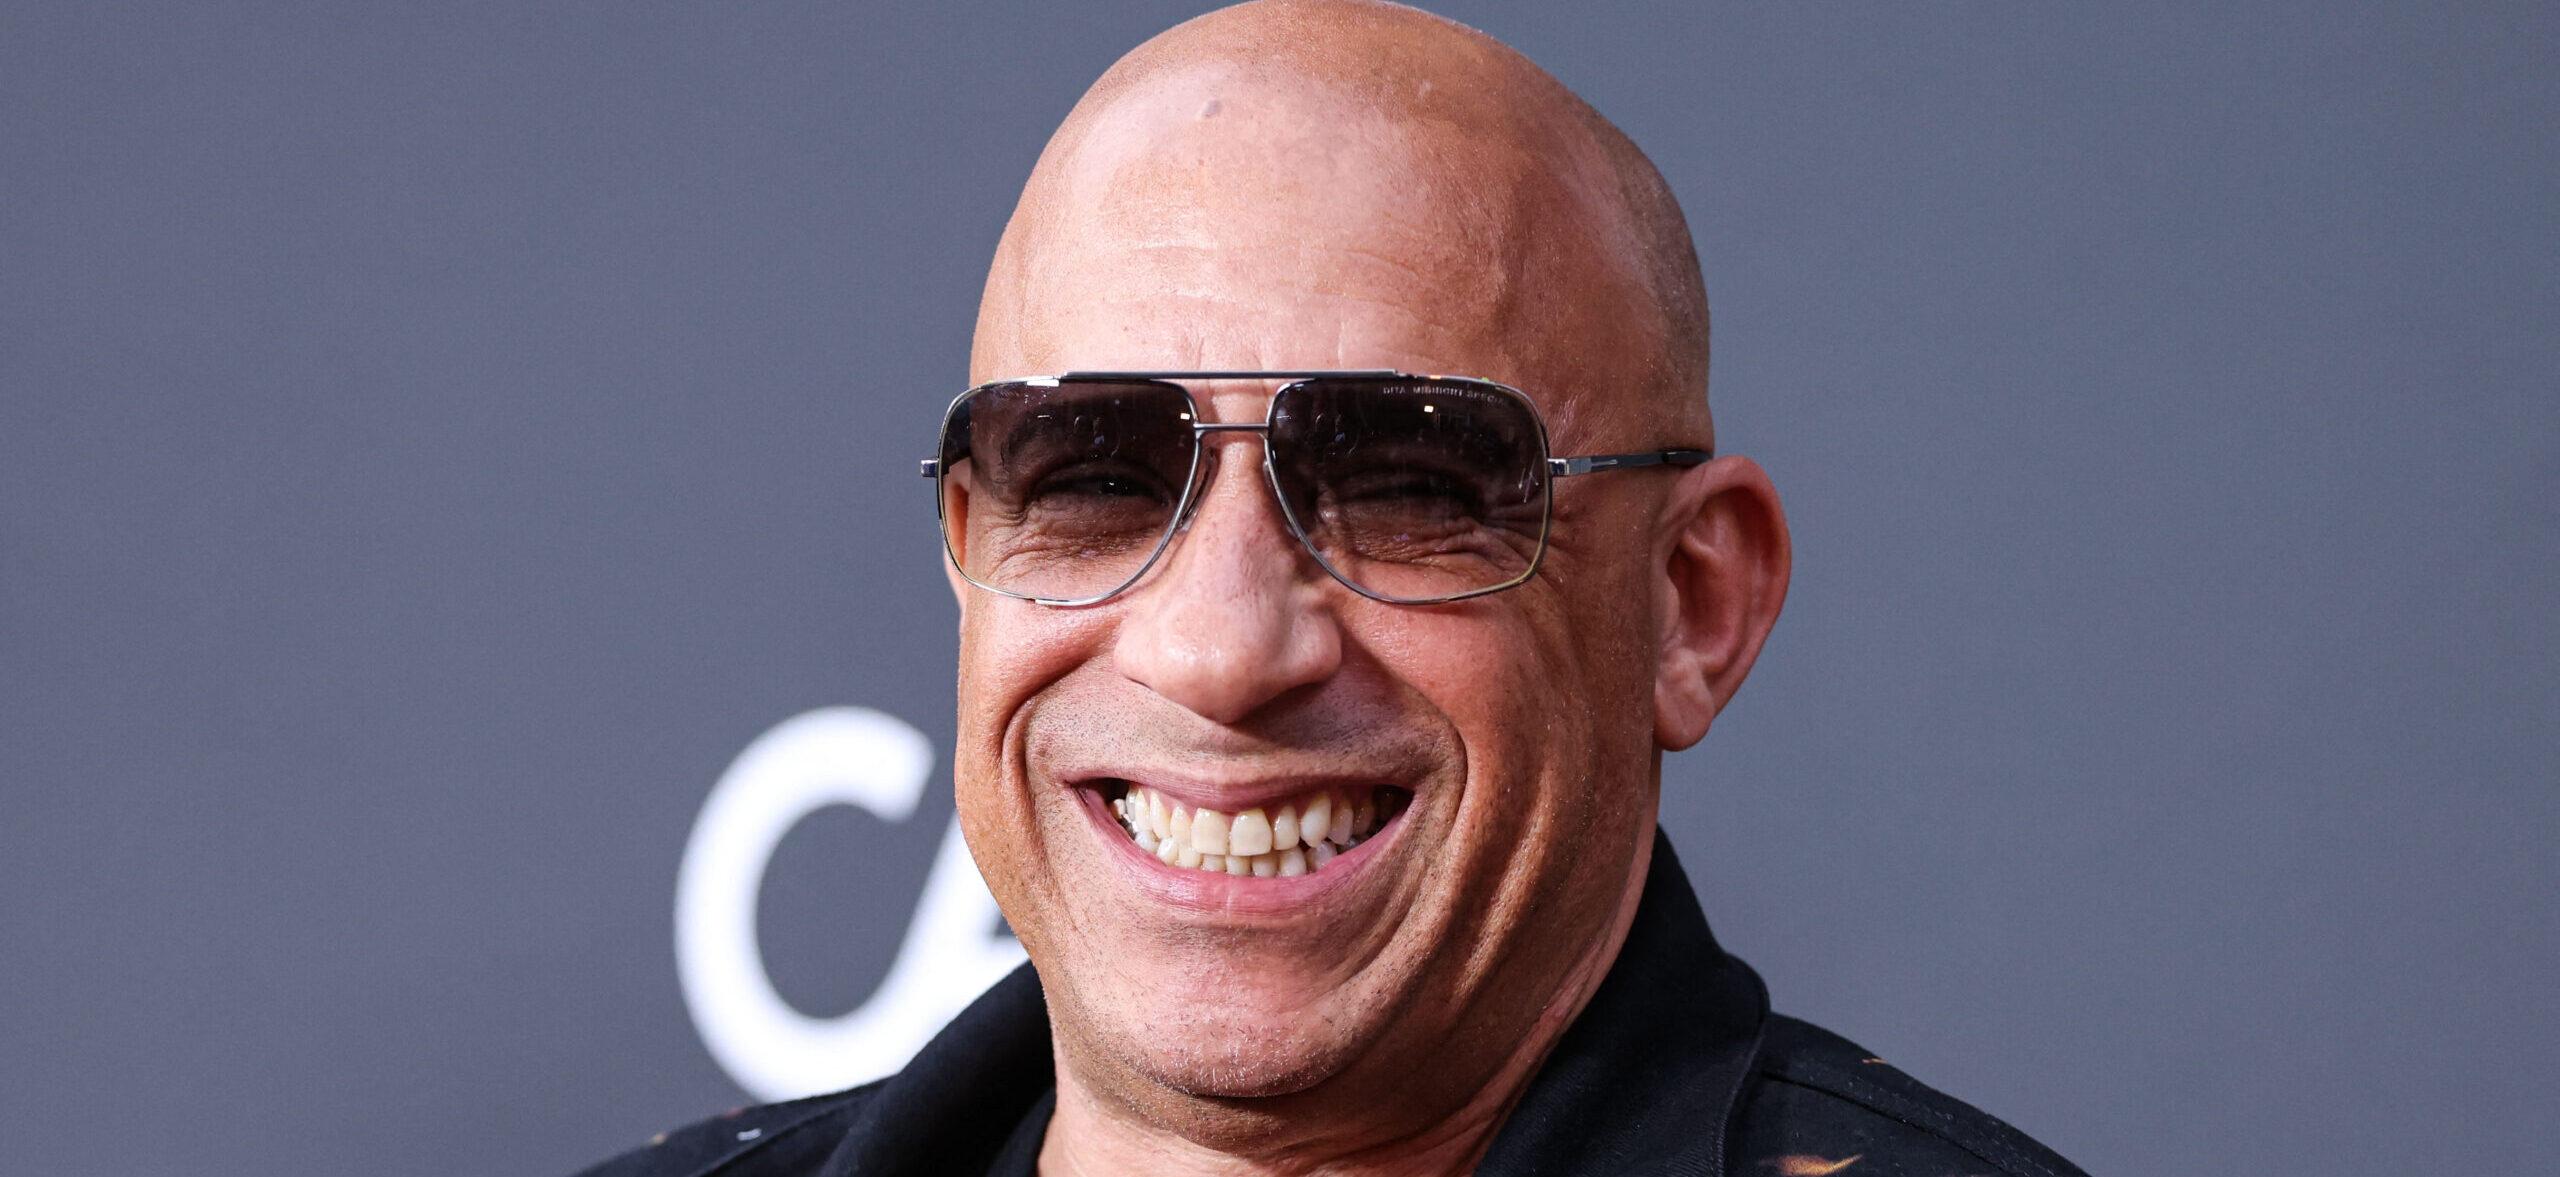 Vin Diesel Slammed For Making Woman ‘Uncomfortable’ In Resurfaced Clip Amid Assault Allegations